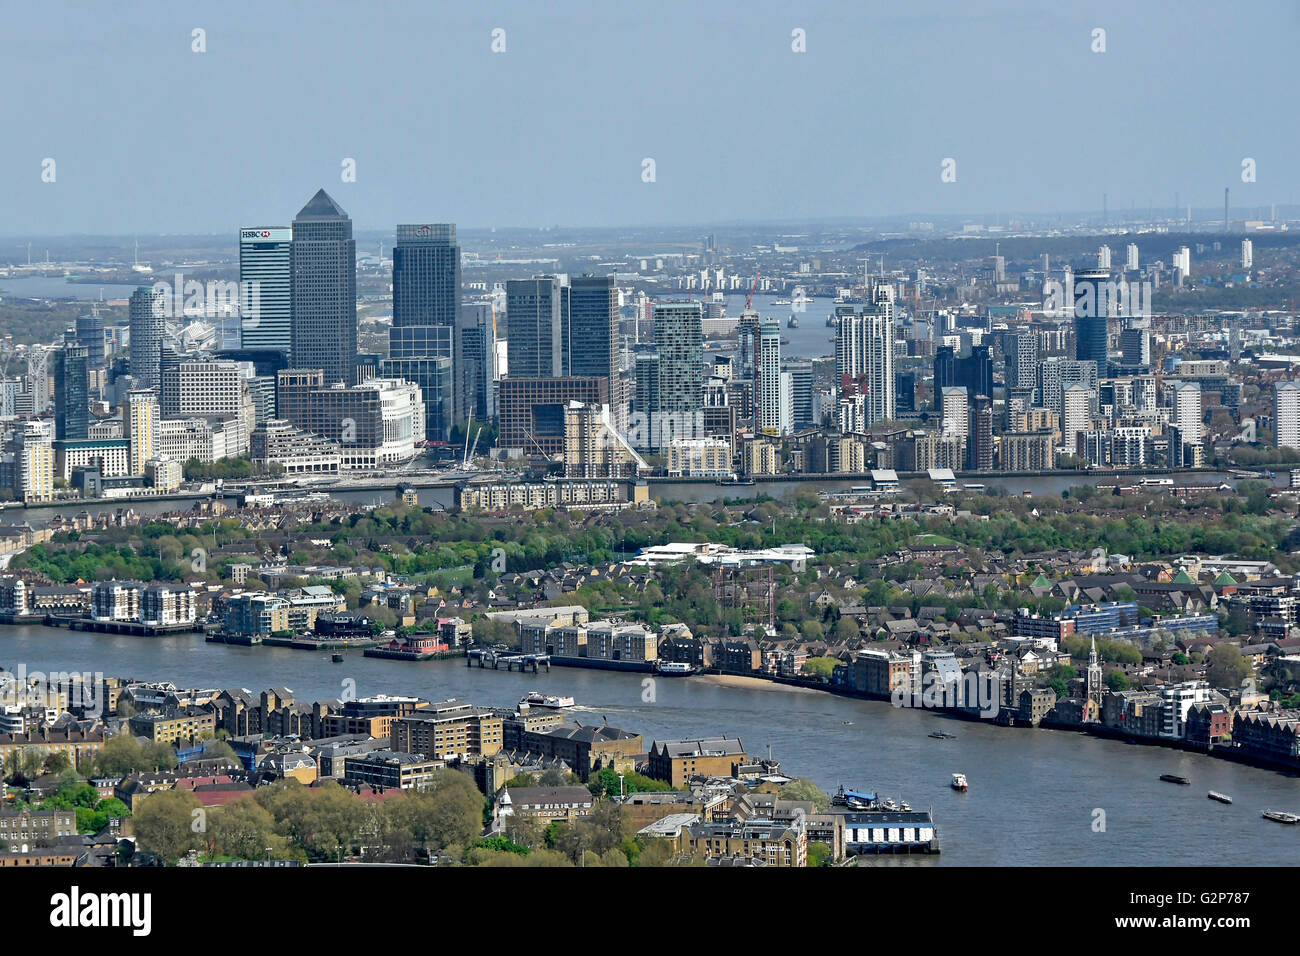 Aerial view looking down from above at the River Thames and London skyline cityscape at Canary Wharf in Isle of Dogs London Docklands England UK Stock Photo